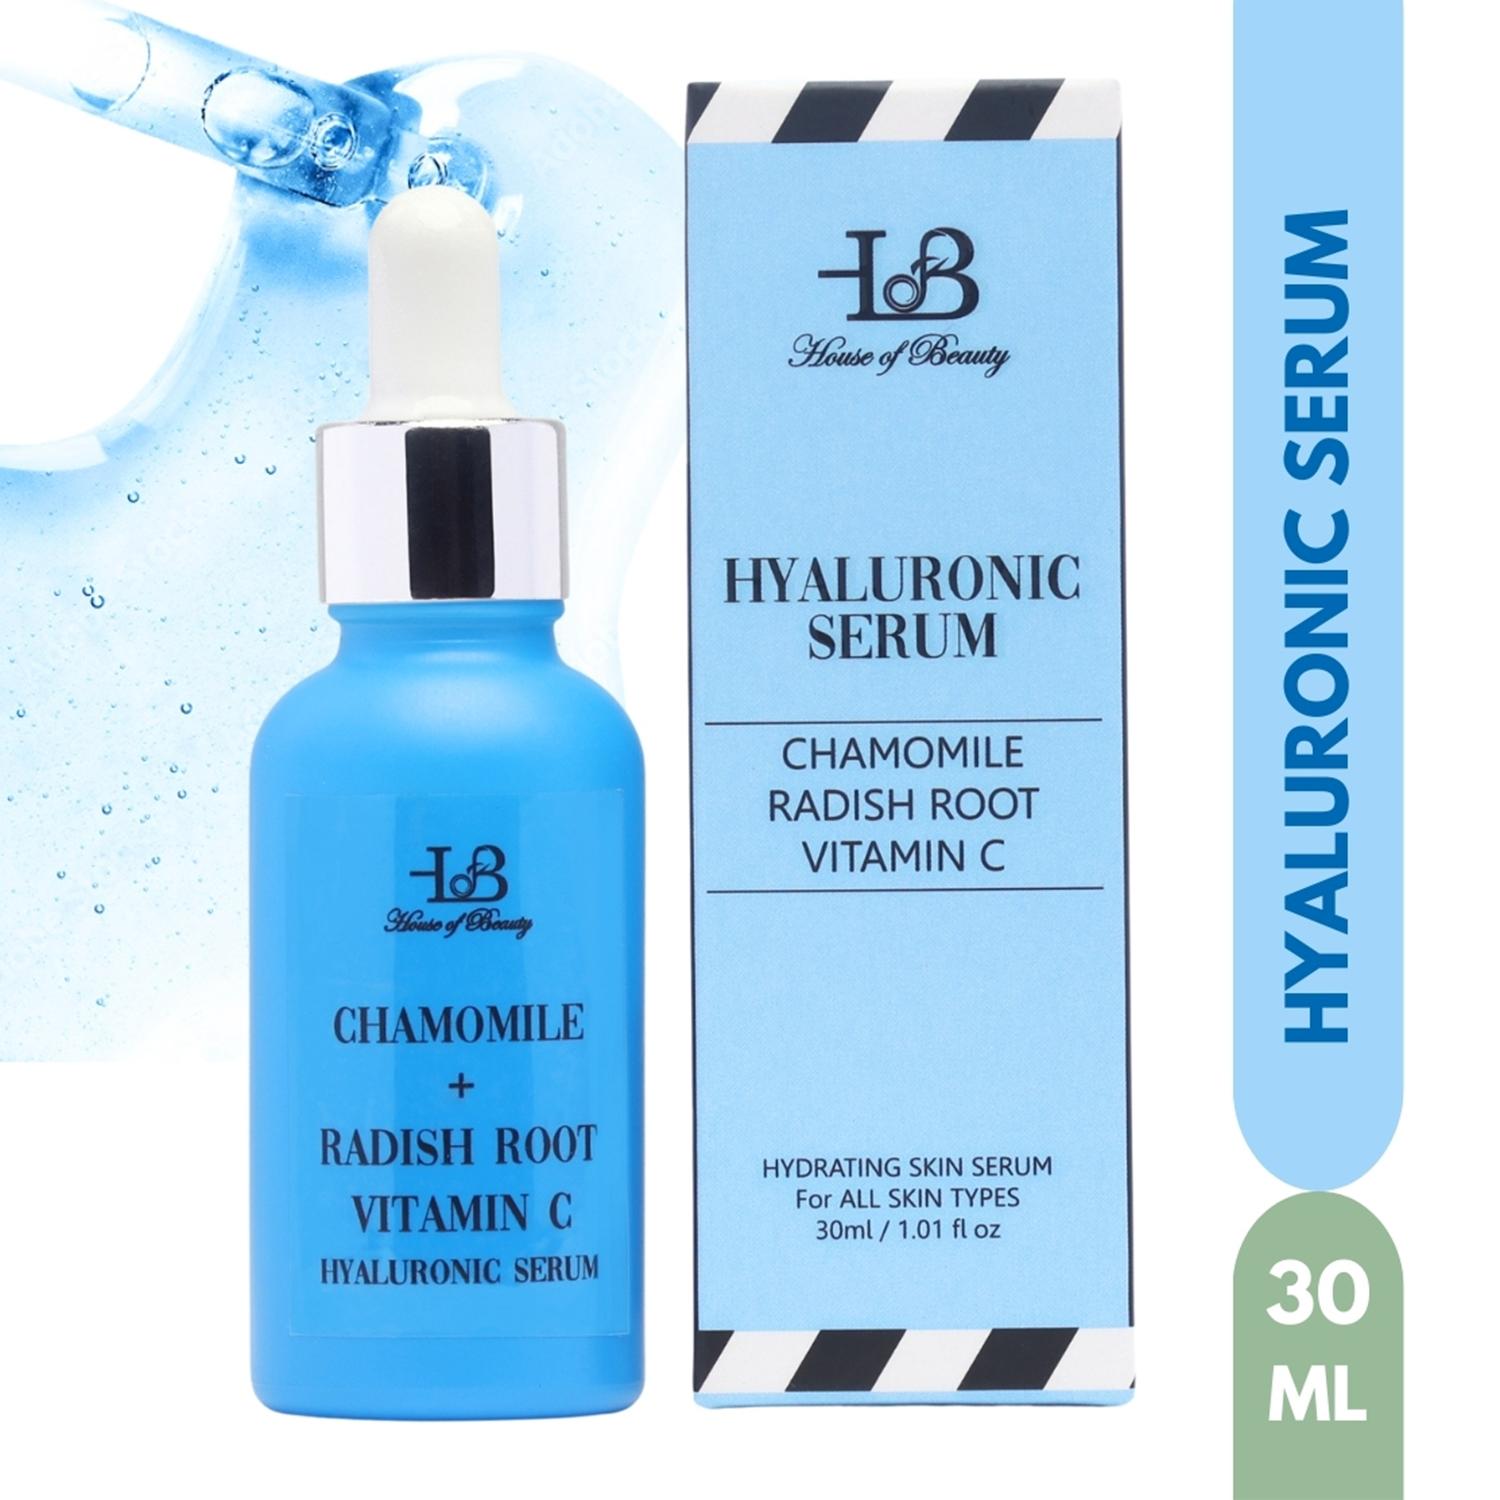 House of Beauty | House of Beauty Hyaluronic Serum- All Skin Types To Brighten & Hydrate Skin W/T Chamomile (30 ml)